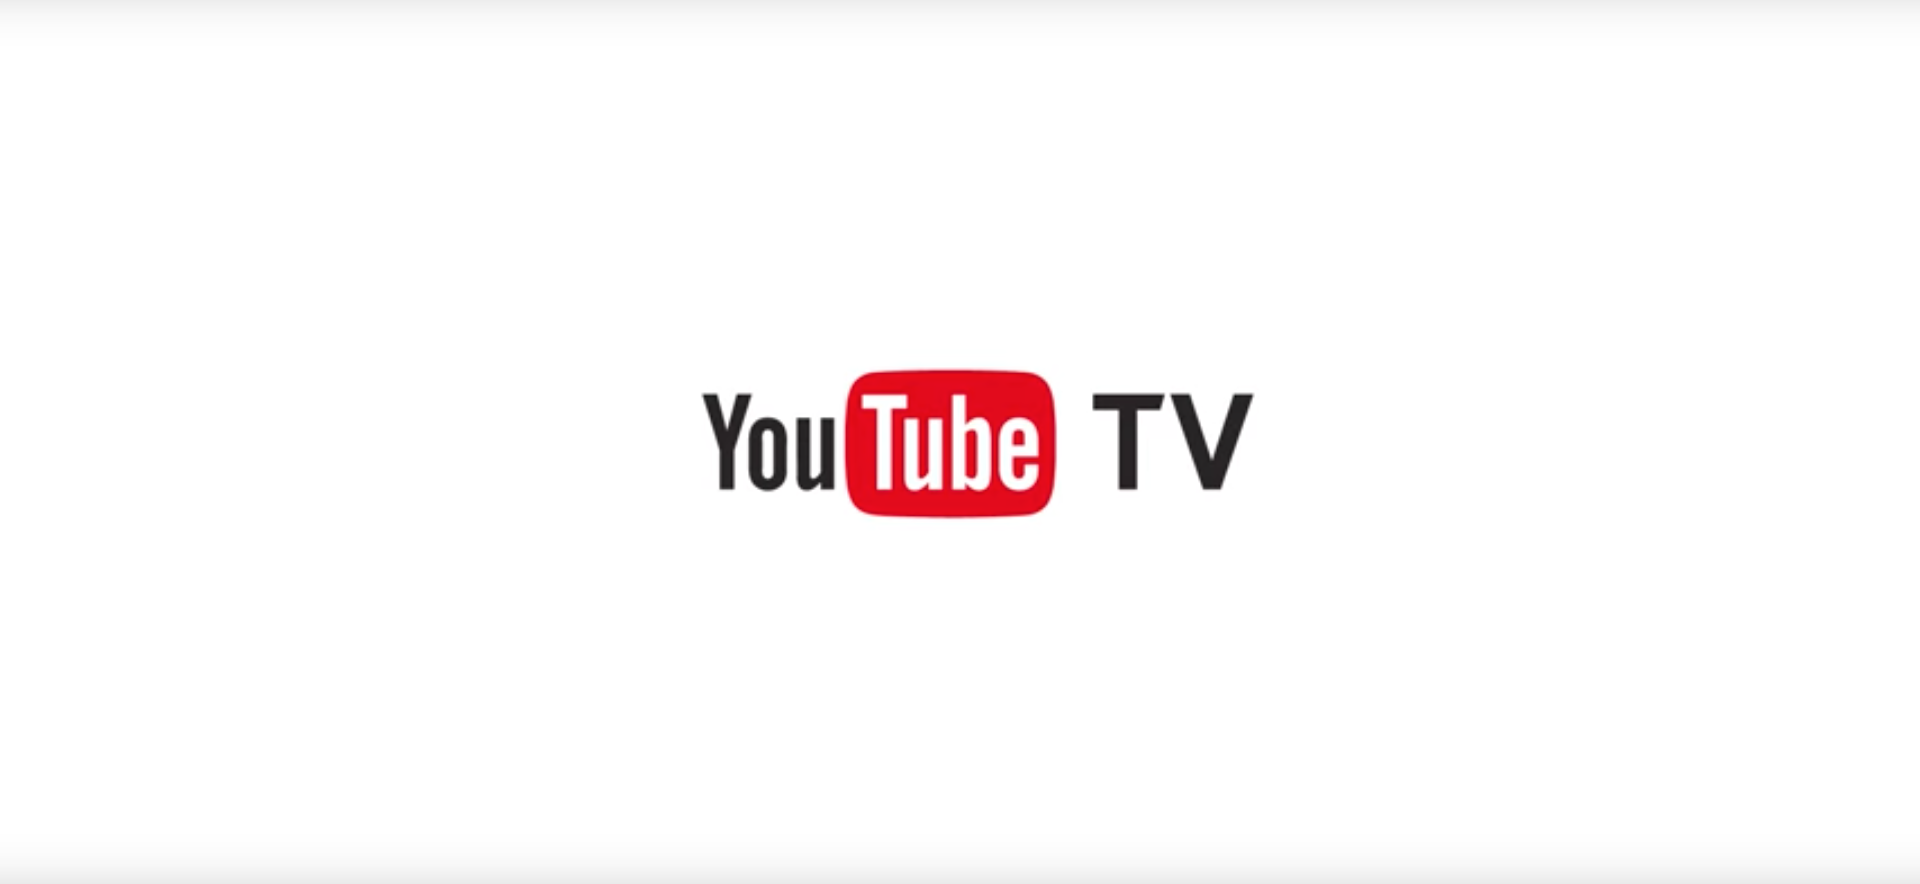 YouTube TV expands to Houston, Atlanta, Phoenix and additional cities ...